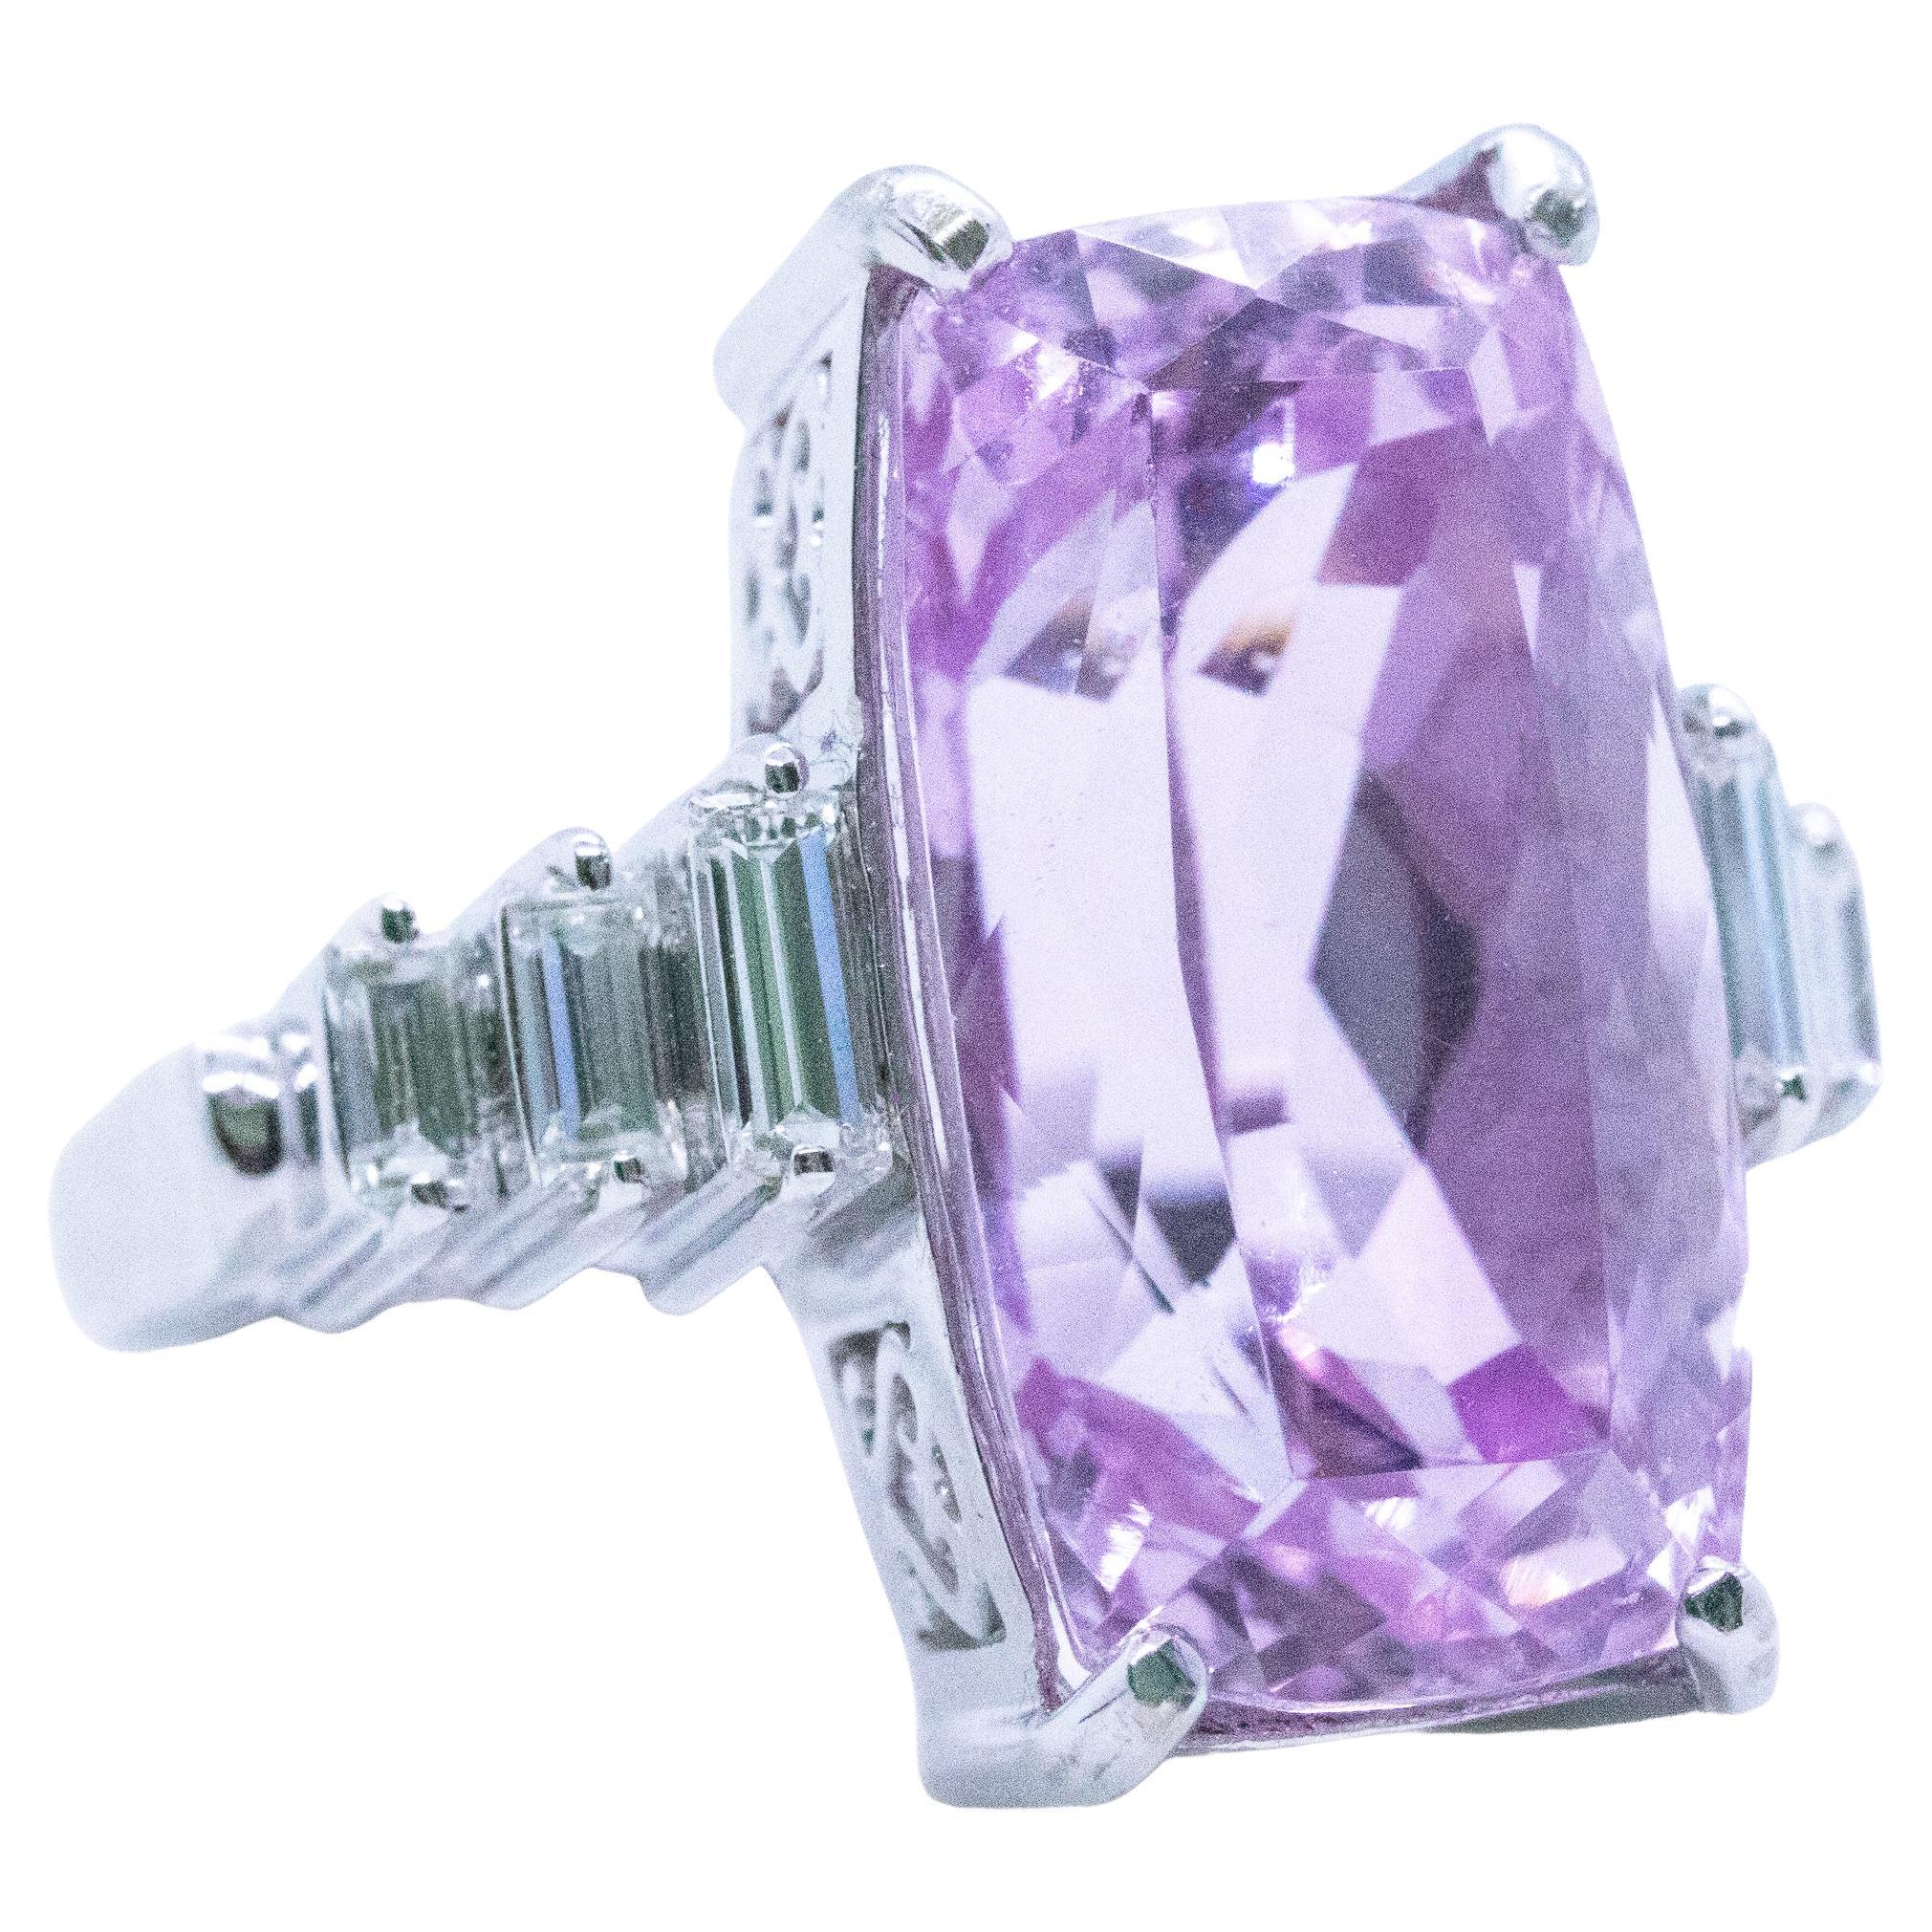 Art Deco 1940 Skyscraper Ring 18kt Gold with 15.41 Cts of Diamonds and Kunzite